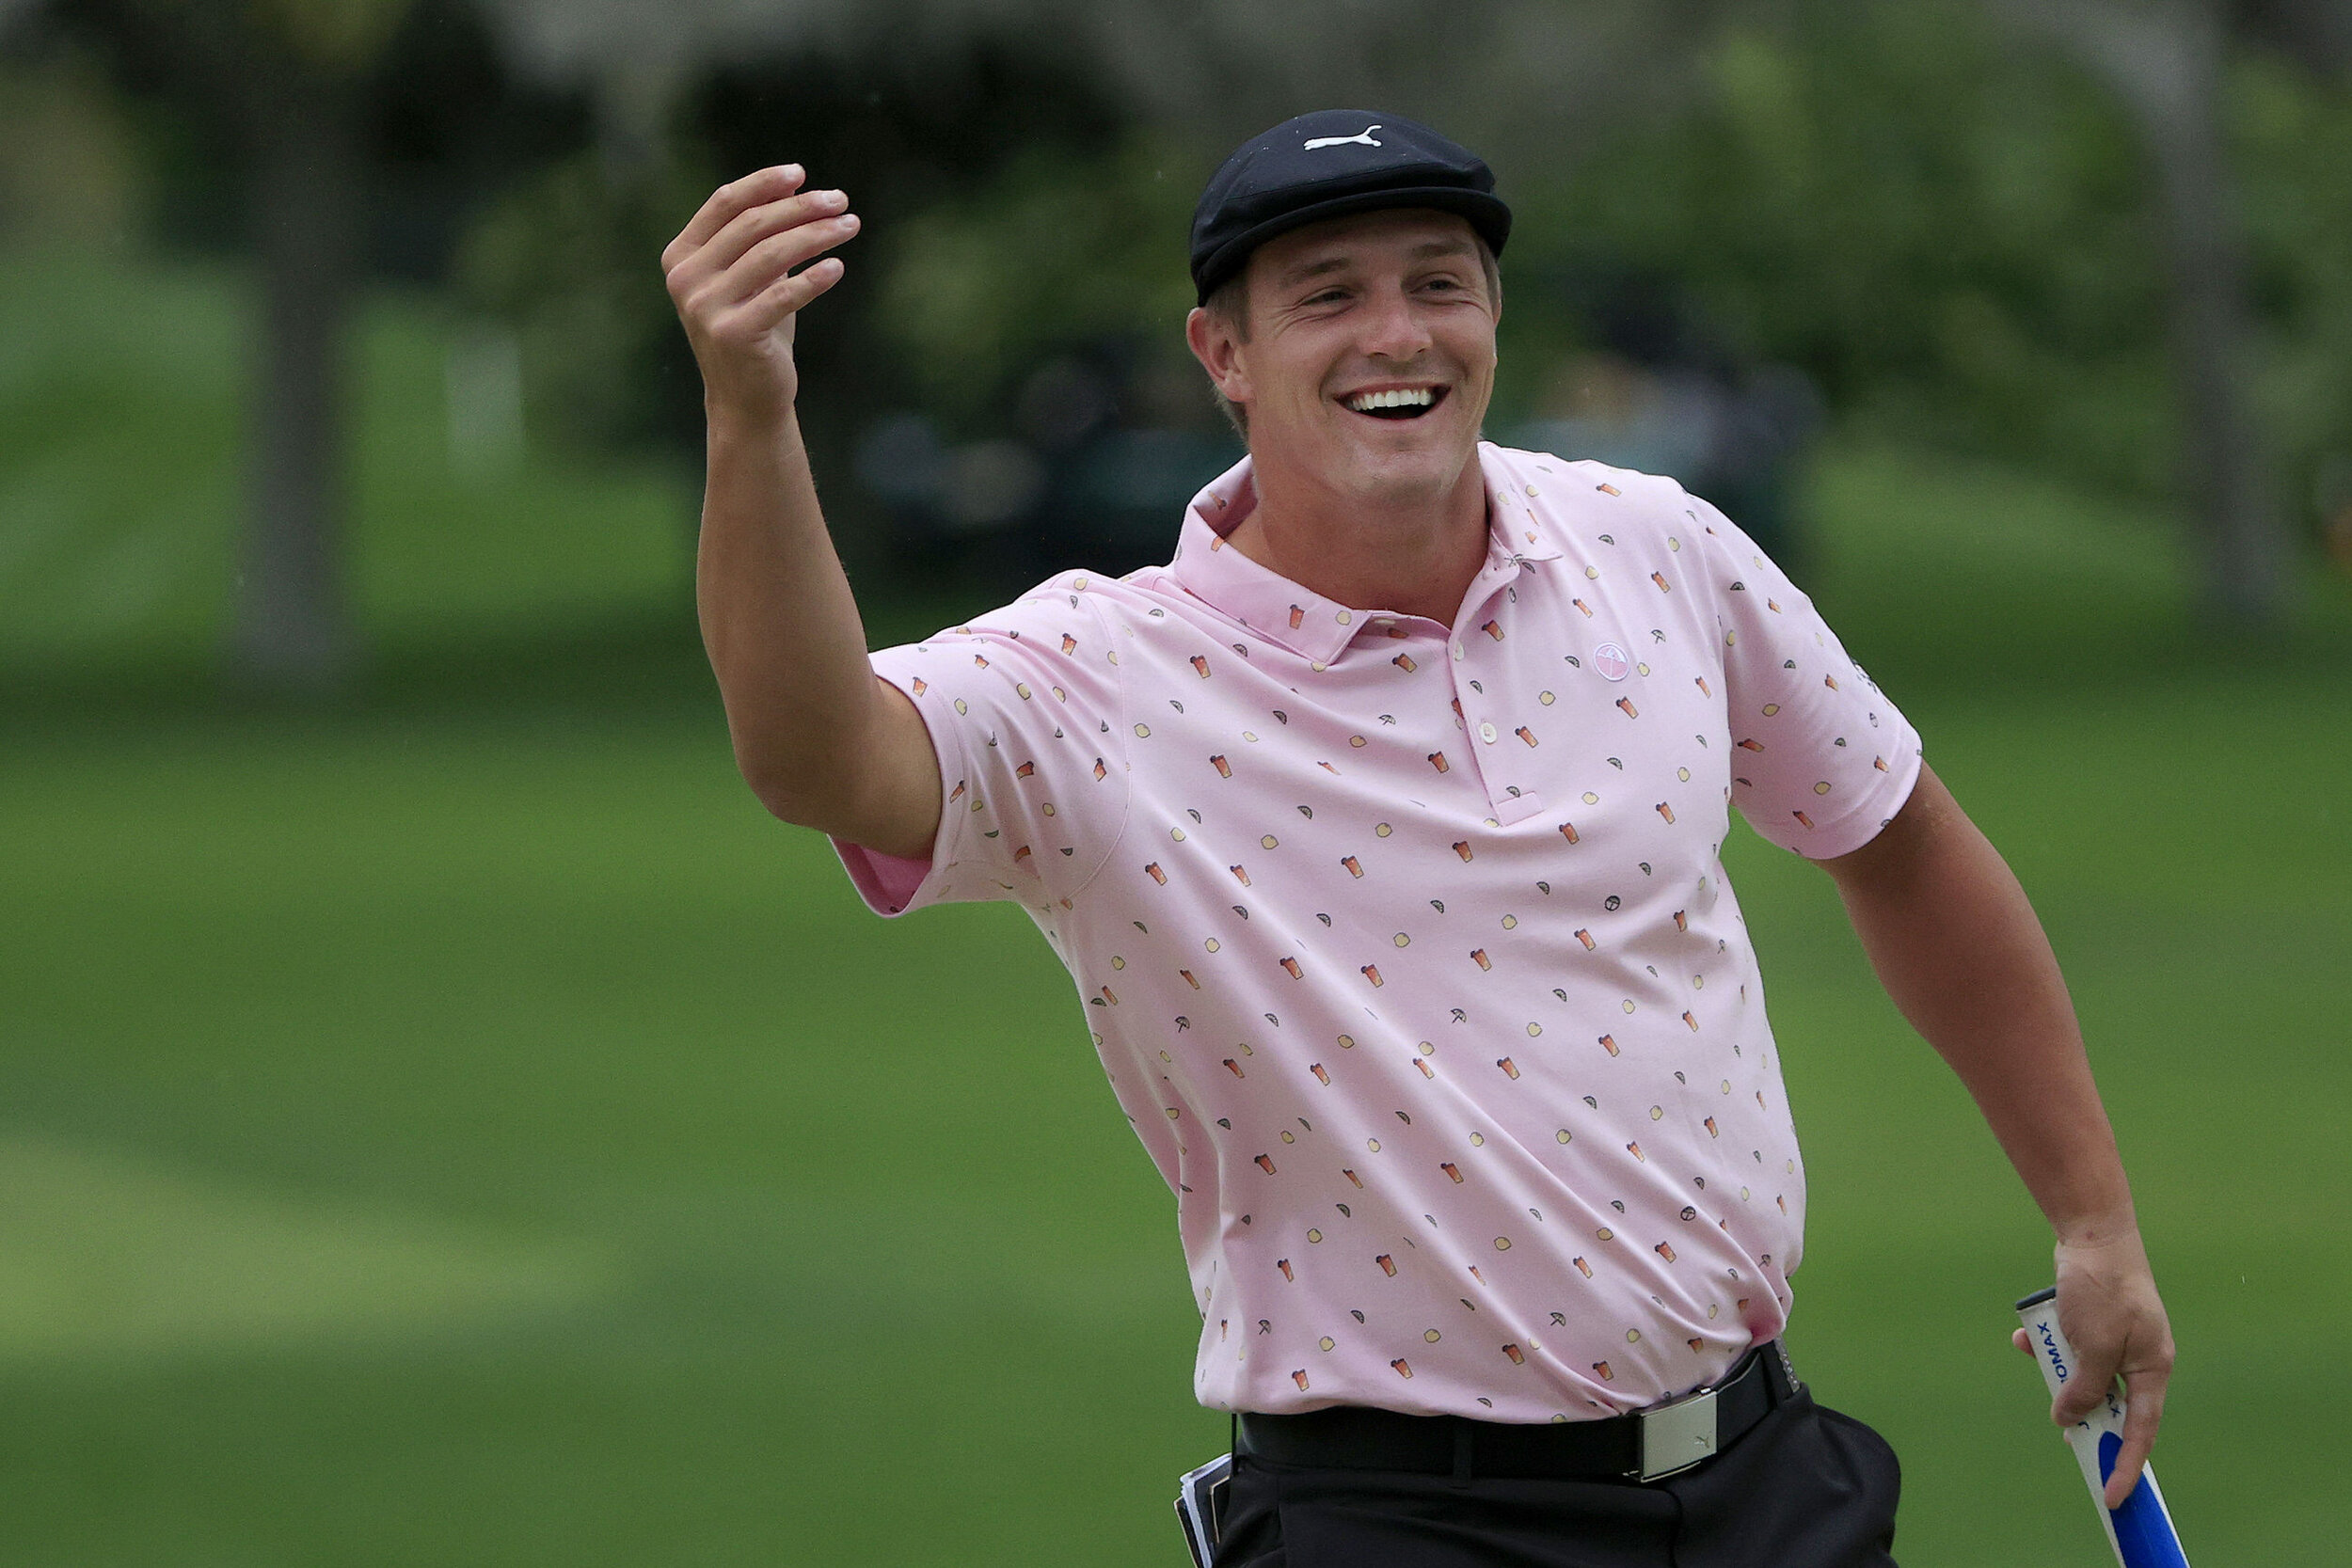  ORLANDO, FLORIDA - MARCH 06: Bryson DeChambeau of the United States smiles as he tosses his golf ball on the 16th hole during the third round of the Arnold Palmer Invitational Presented by MasterCard at the Bay Hill Club and Lodge on March 06, 2021 